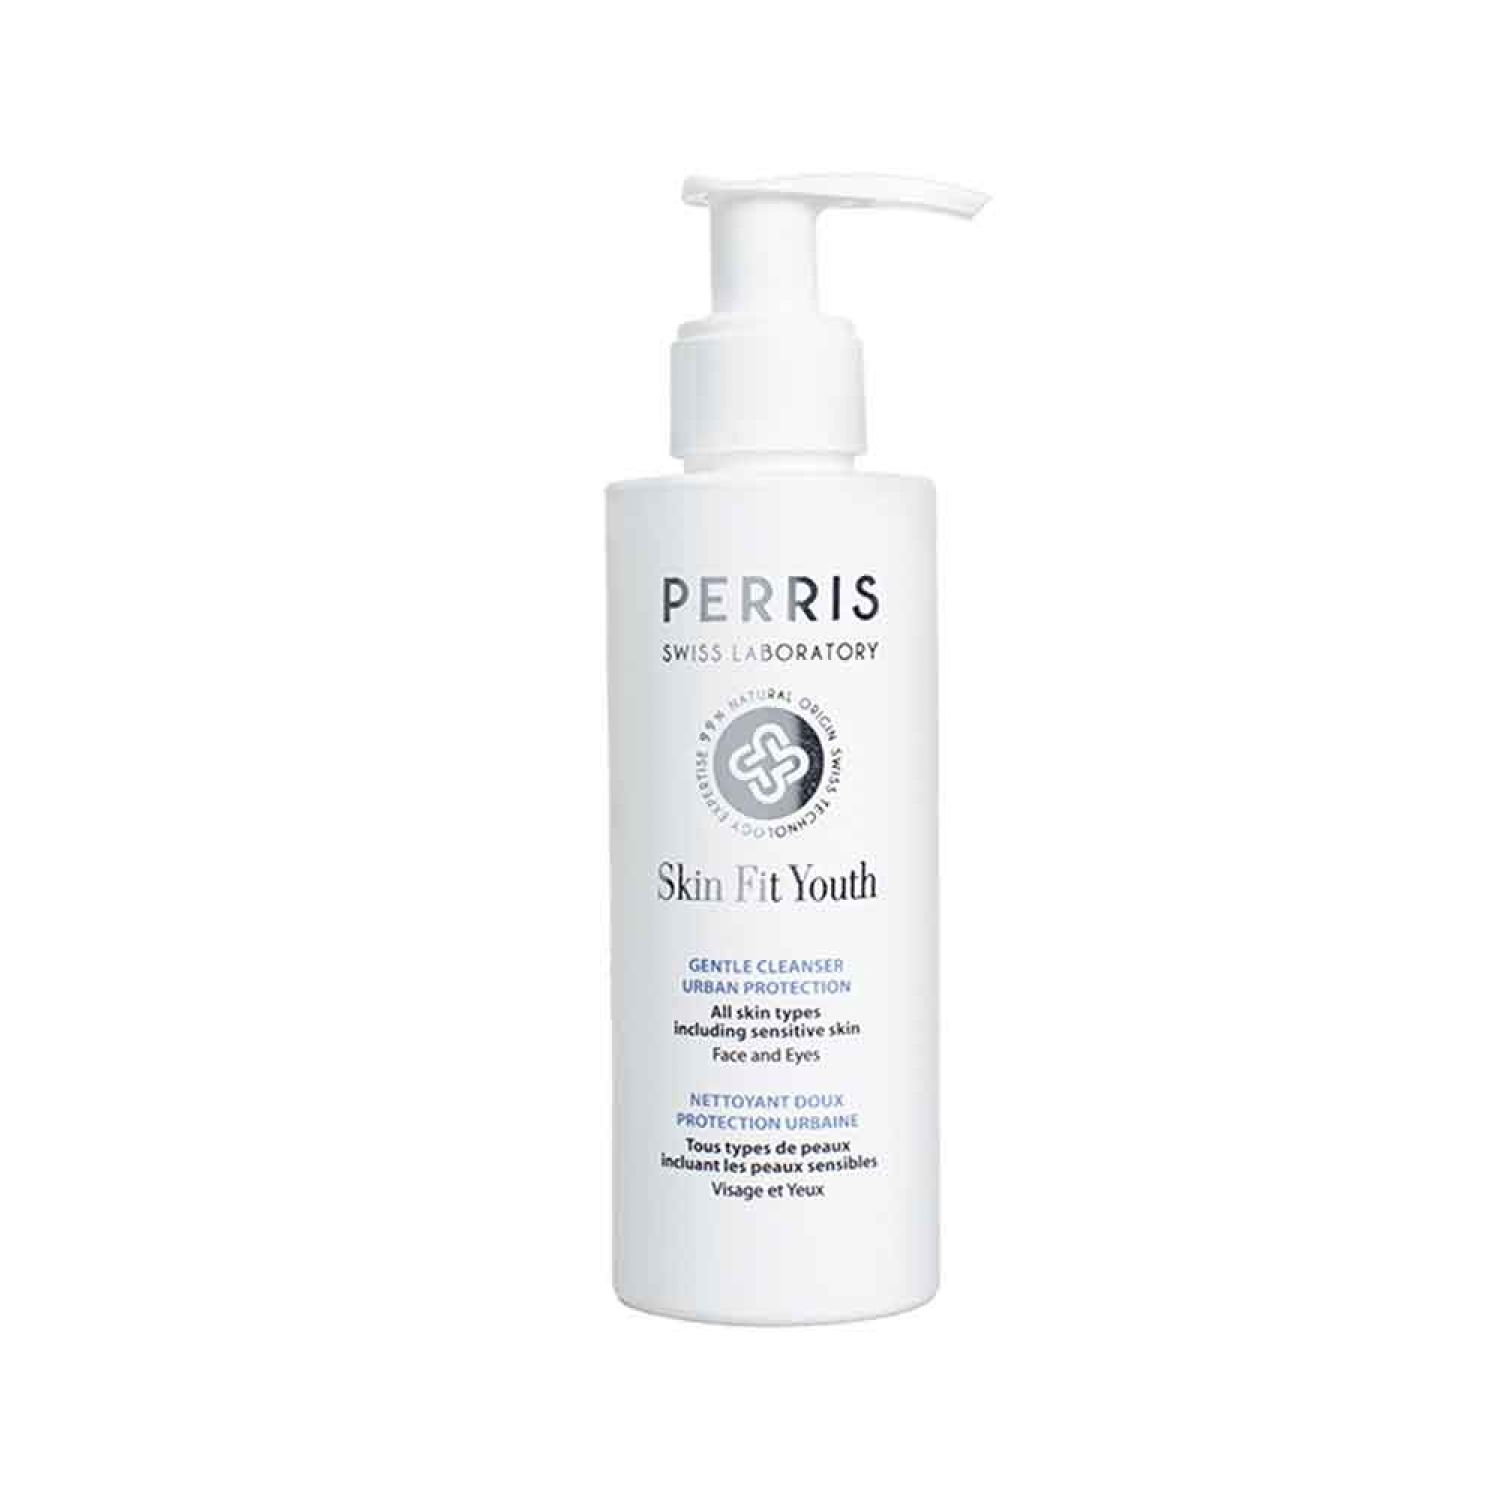 Perris Swiss Laboratory Skin Fitness Skin Fit Youth Urban Protection Gentle Cleanser